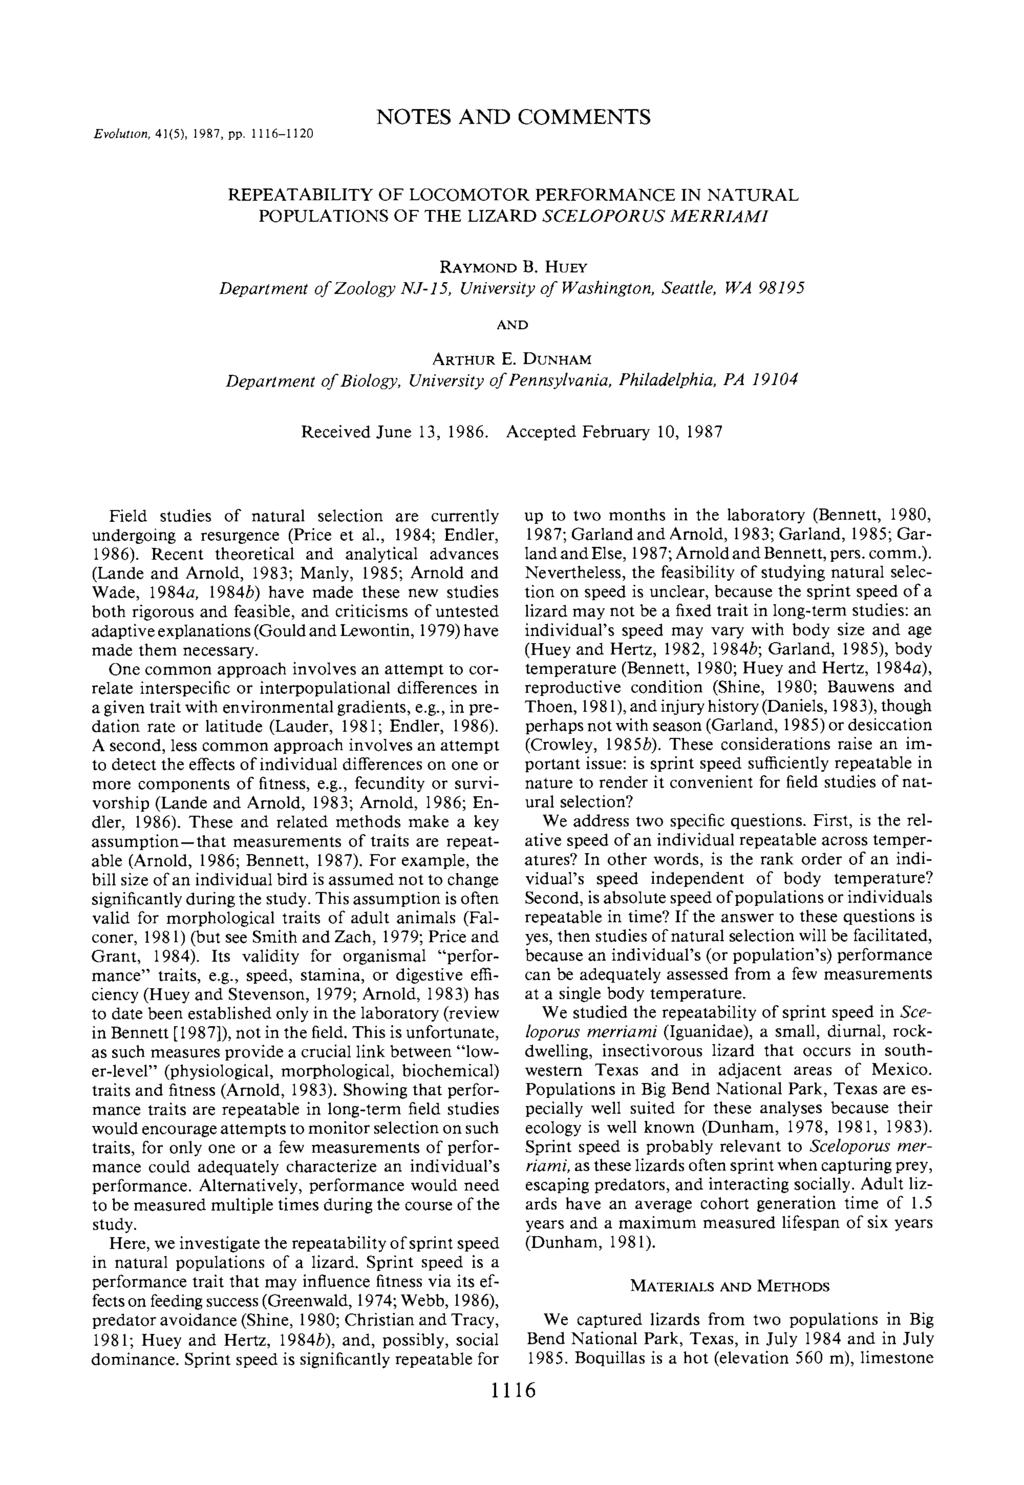 Evolution, 41(5), 1987, pp. 1116-1120 NOTES AND COMMENTS REPEATABILITY OF LOCOMOTOR PERFORMANCE IN NATURAL POPULATIONS OF THE LIZARD SCELOPOR US MERRIAMI RAYMOND B.